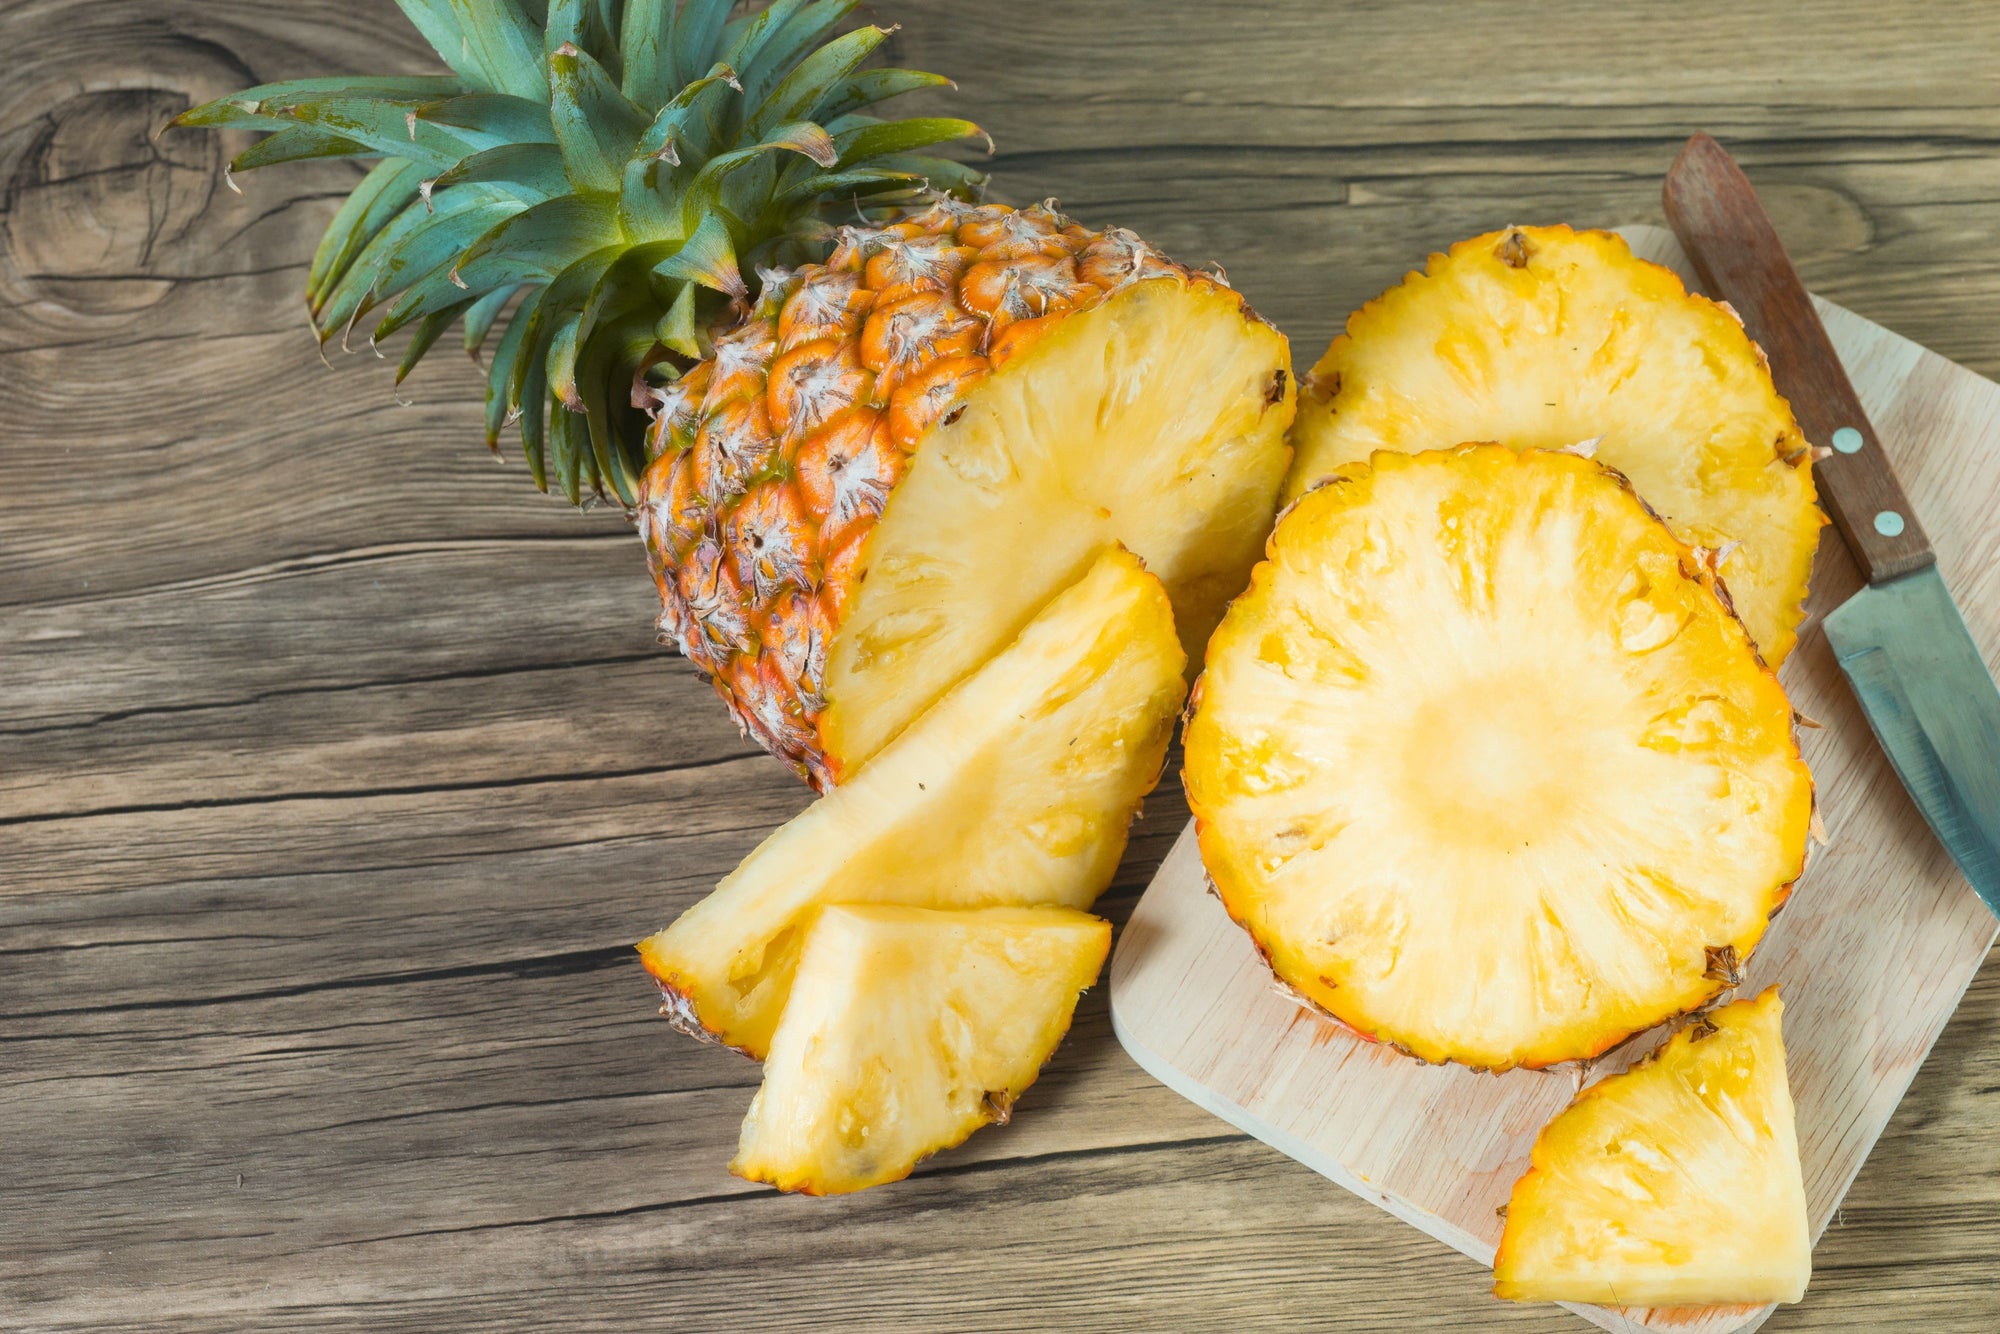 Why Eat Pineapple Before Surgery and after?